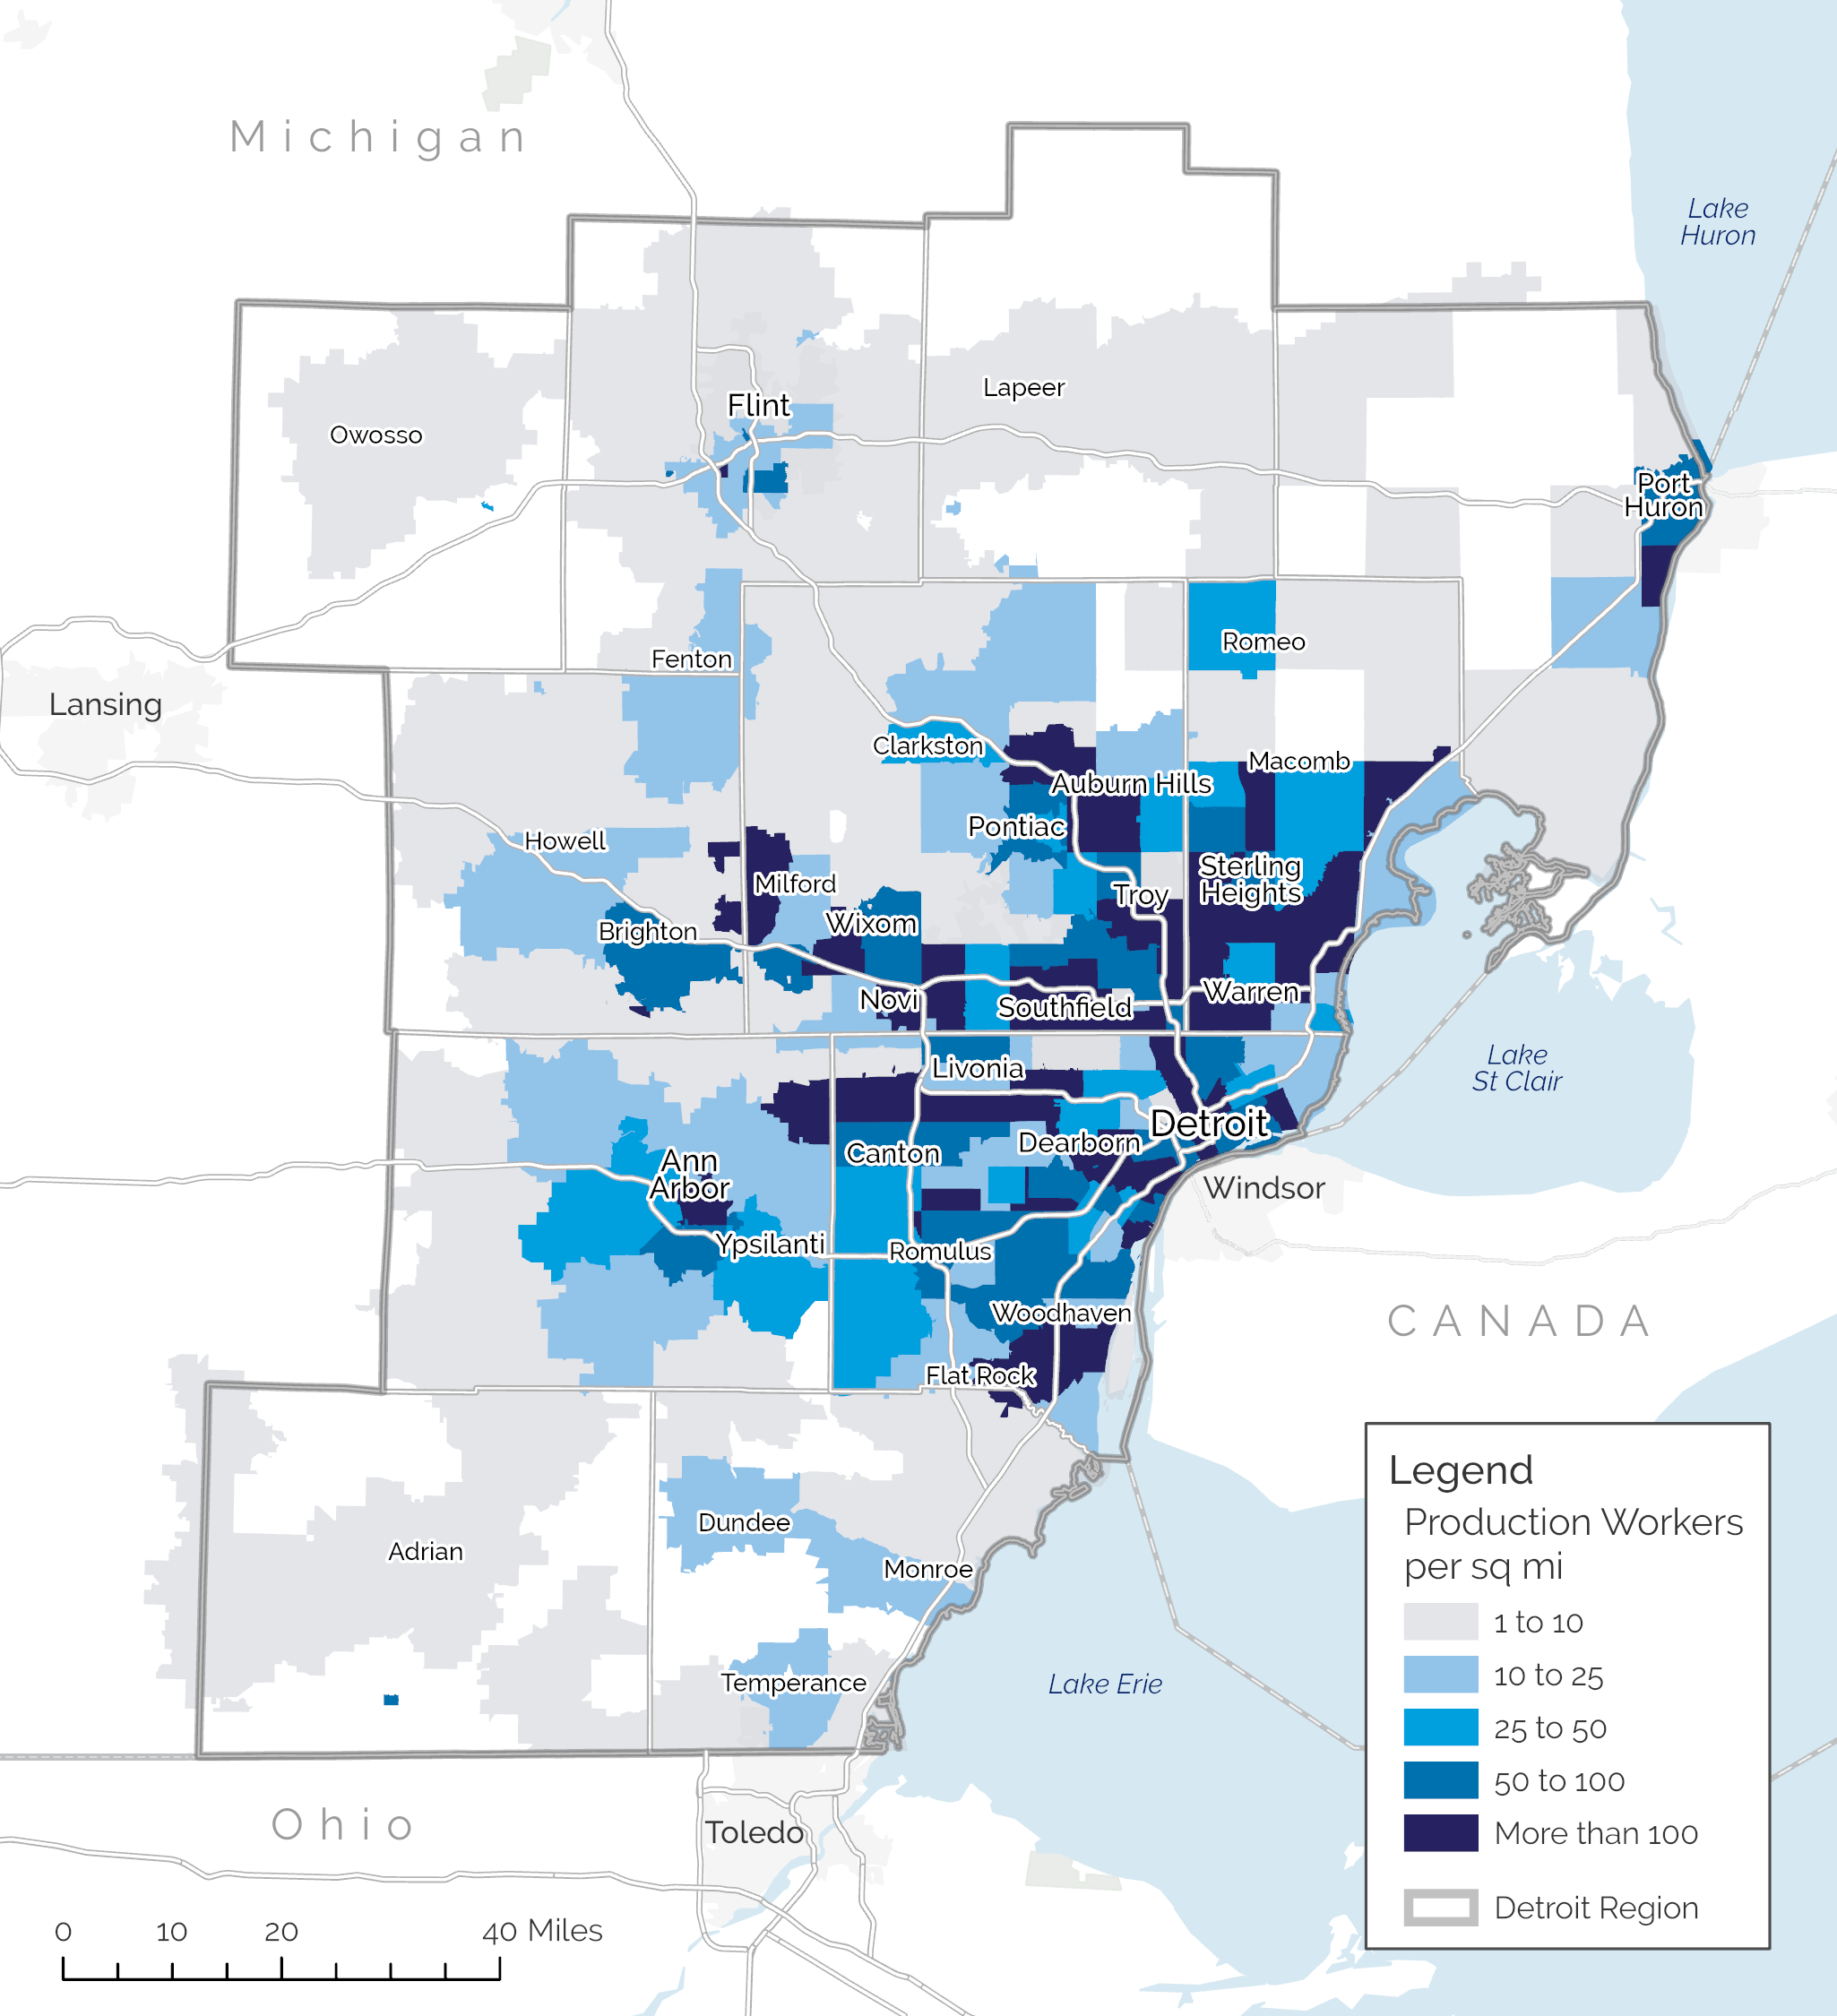 Map representing the density of production workers in the Detroit Region